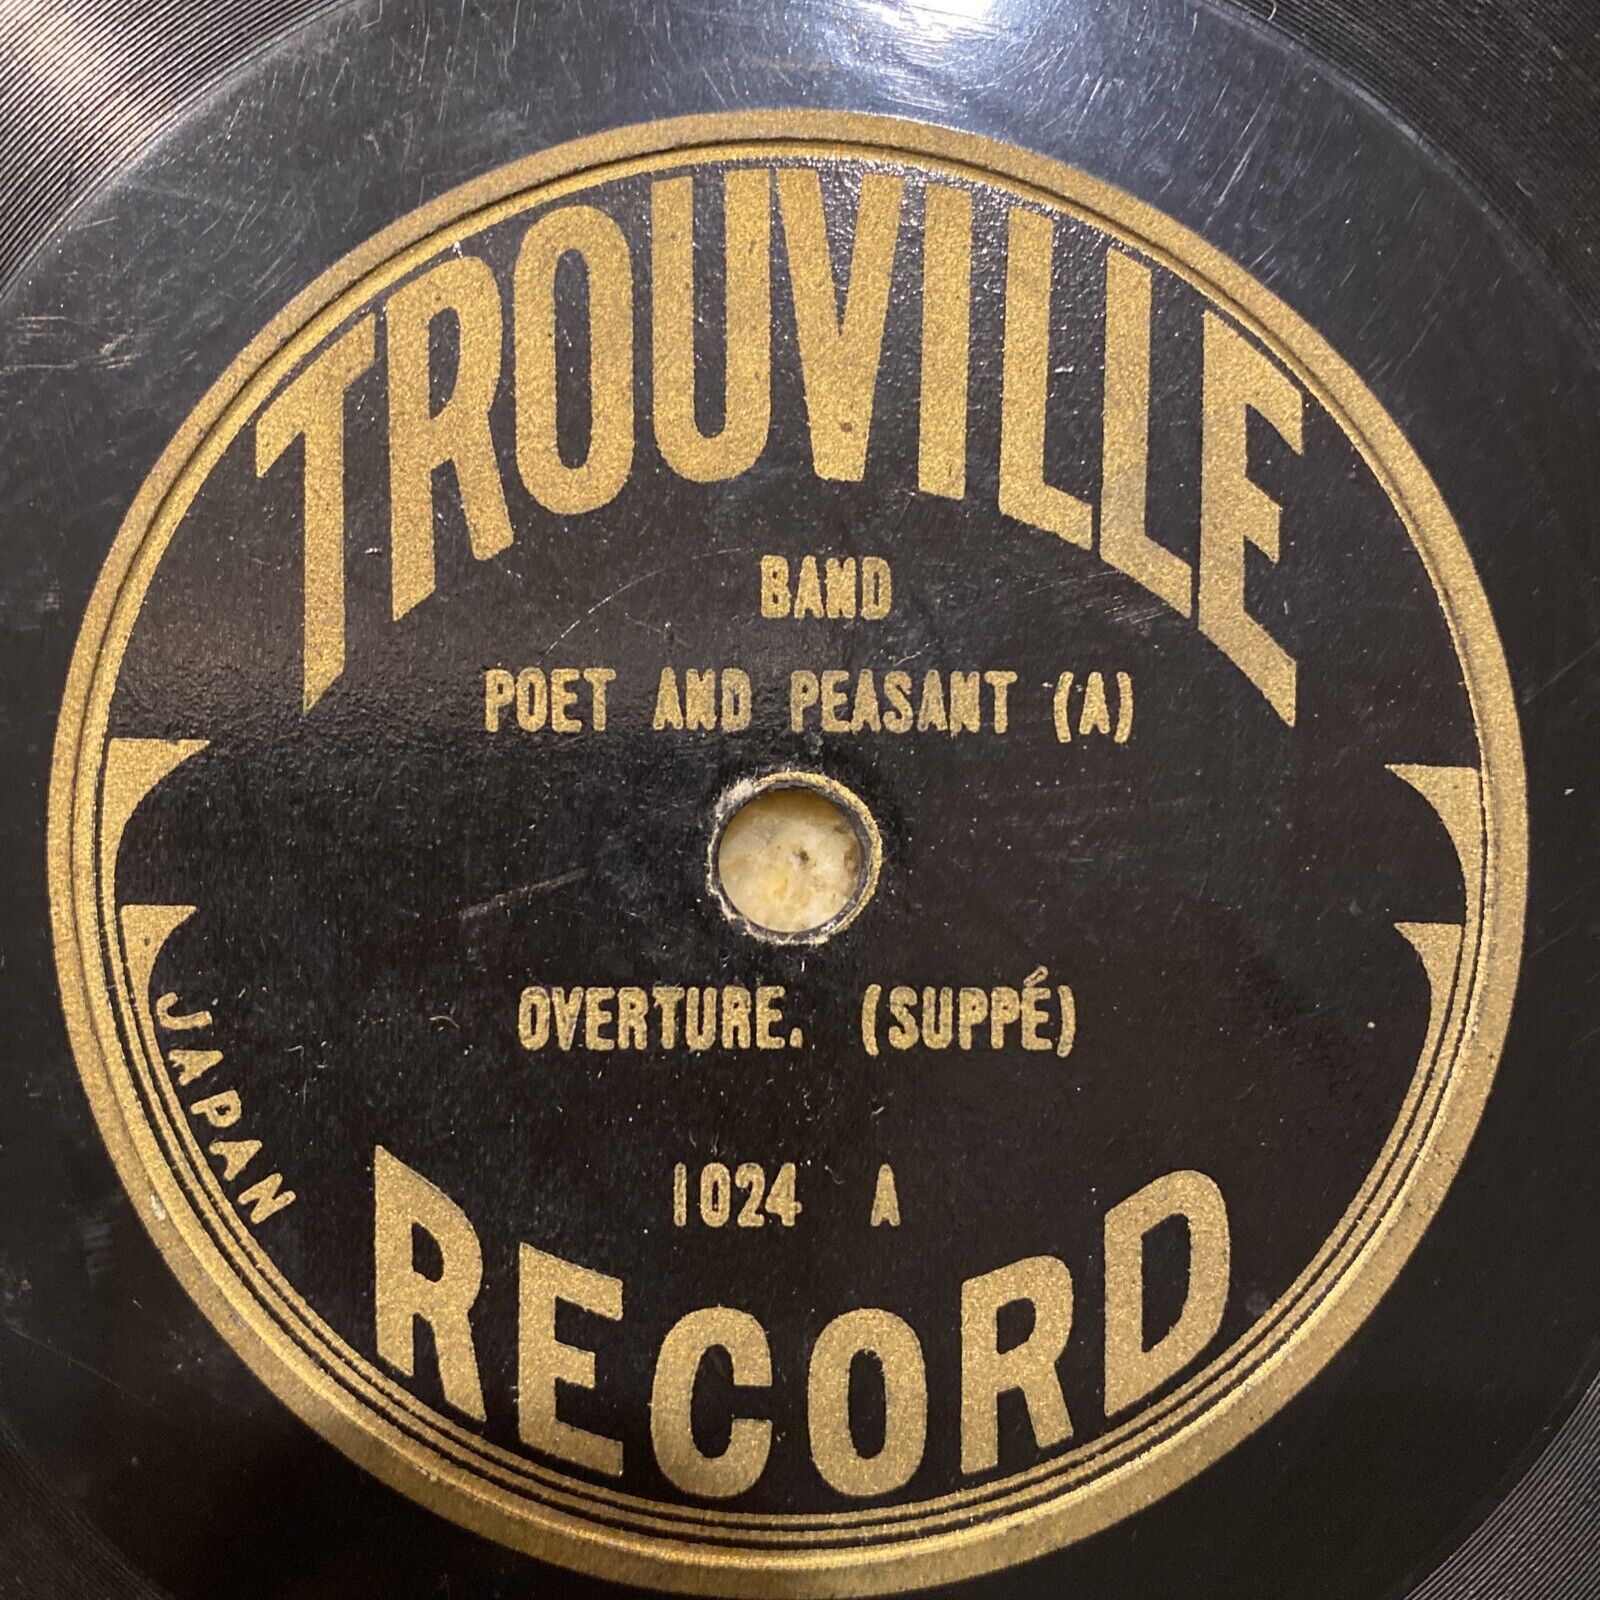 PRINCE\'S BAND 1915 Japanese 78 rpm TROUVILLE 1024 POET & PEASANT vertical RARE